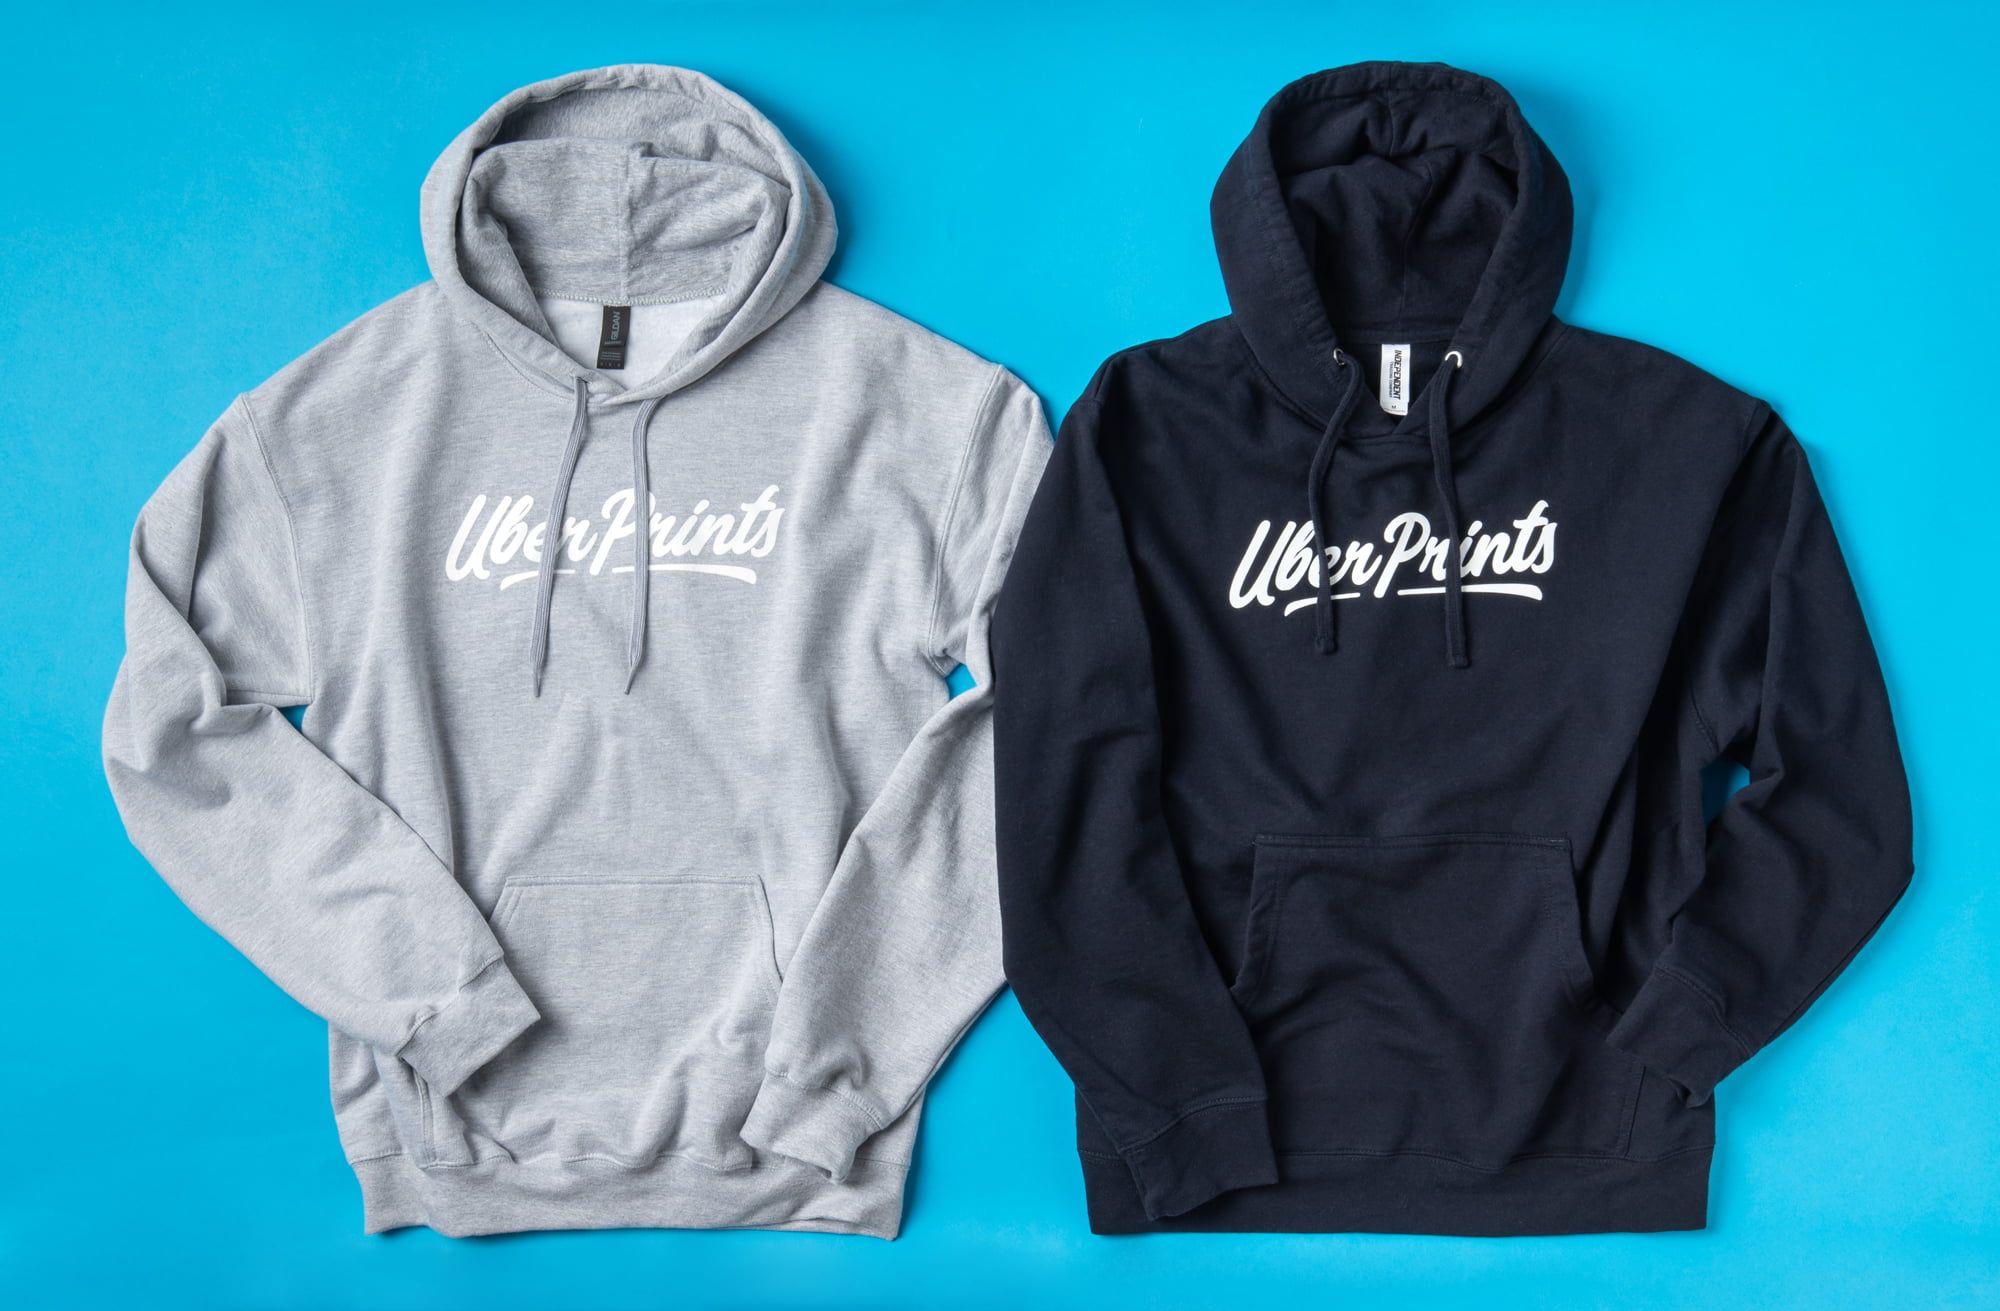 Flat top down view of the Basic Hoodie and the Premium Hoodie